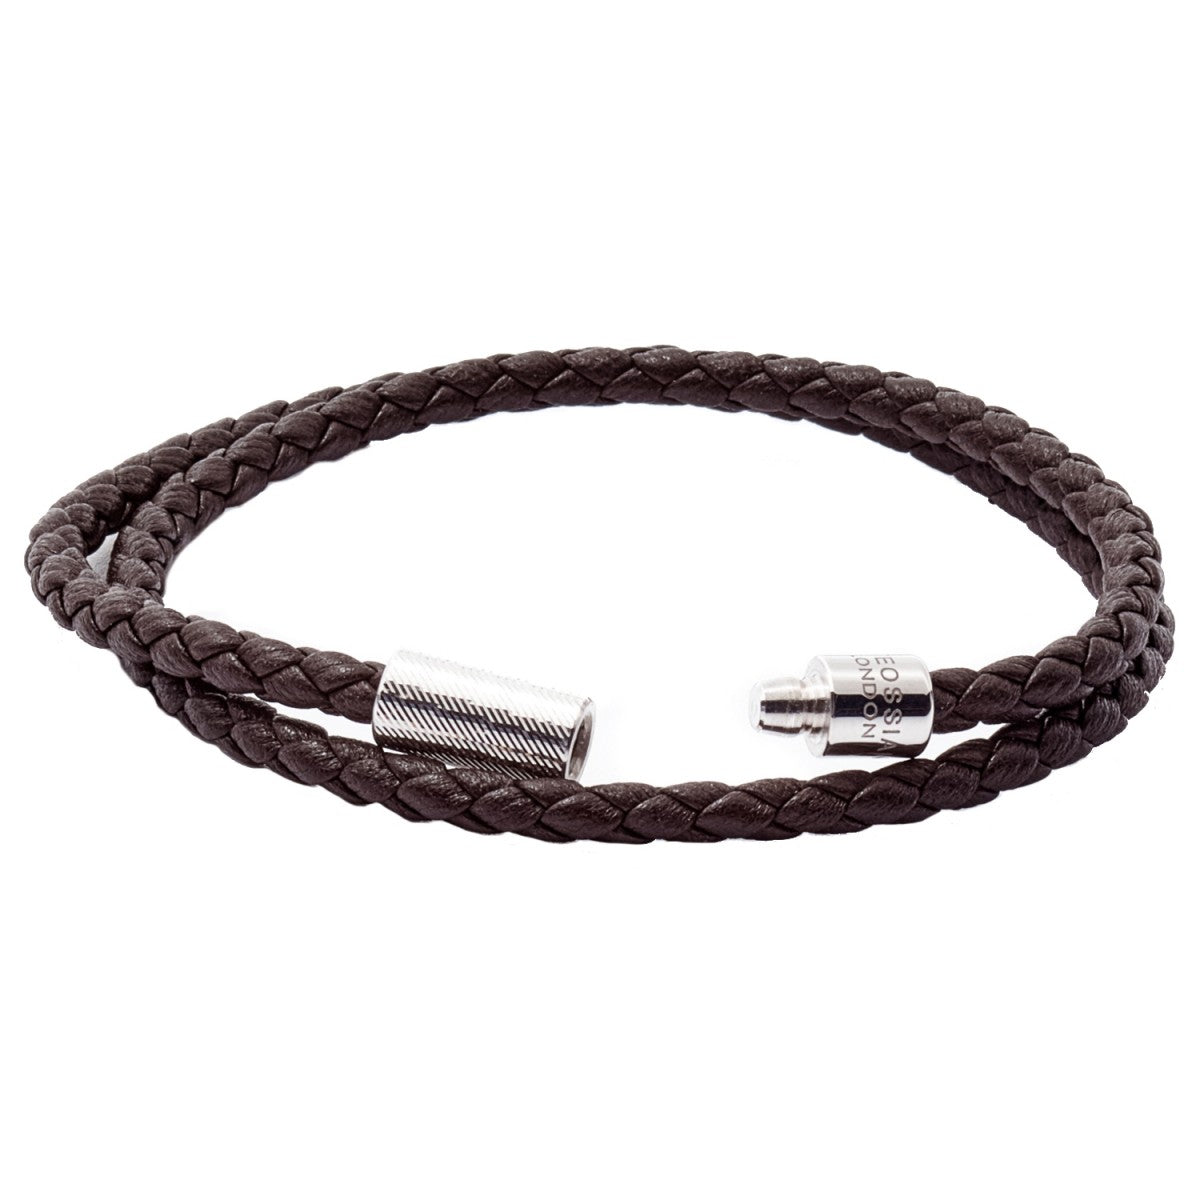 Tateossian POP Rigato Double Woven Leather Bracelet, Sterling Silver Cylindrical Pop Tube Clasp, Dark Brown